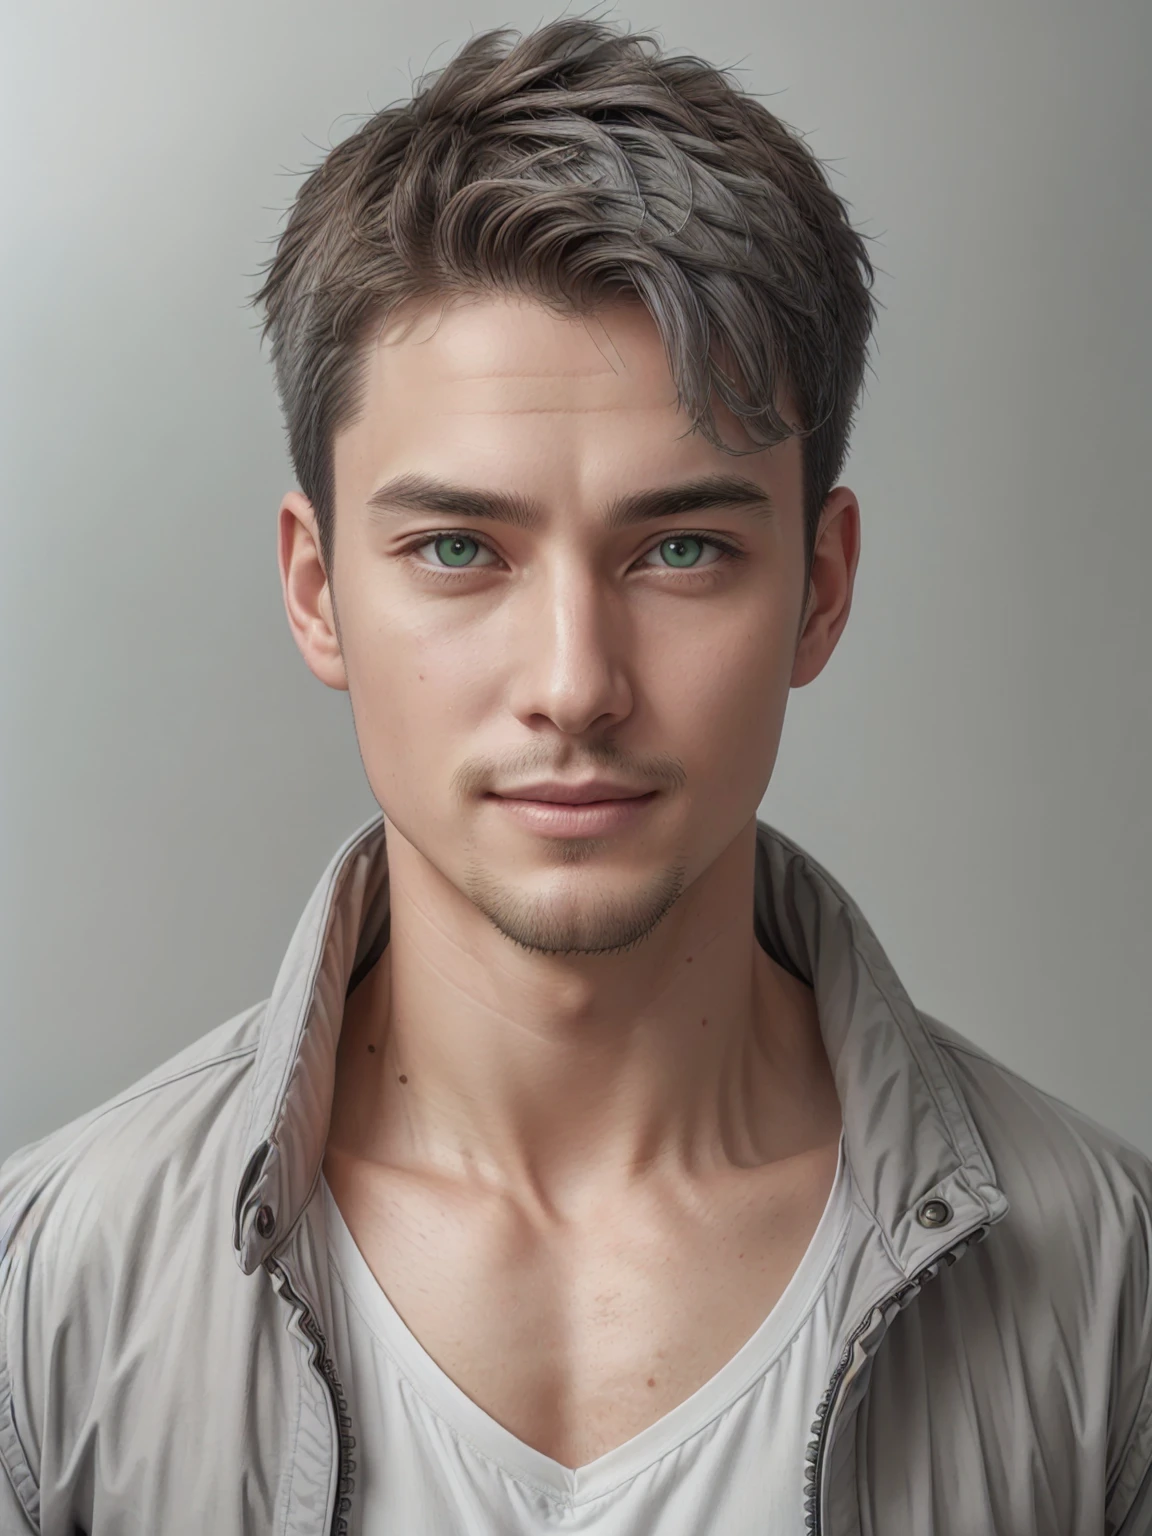 detail skin texture, (Best quality at best:1.4), 8K resolution, A high resolution, (realisticlying, A high resolution:1.4), RAW photogr, (current, Reality:1.3 like, Handsome Caucasian male, super model, Attractive man,40 year old man！, white male head portrait, softlighting, Face focus, cheerfulness, cheerfulness, warm lights, ((gray white background)), ((gray white background)). ((gray wall background)), head portrait, (Very short hair), Wear a modern and stylish jacket and shirt, Handsome, young, green-eyed, flathead, Very short hair, flathead, with a round face, Brown hair, shaved ones, clean shaven, perfectly straight in front of the camera, surreal, Detailed pubic hair, naturalistic portrait, right in front of camera, very Detailed pubic hair eyes, perfectly straight in front of the camera,